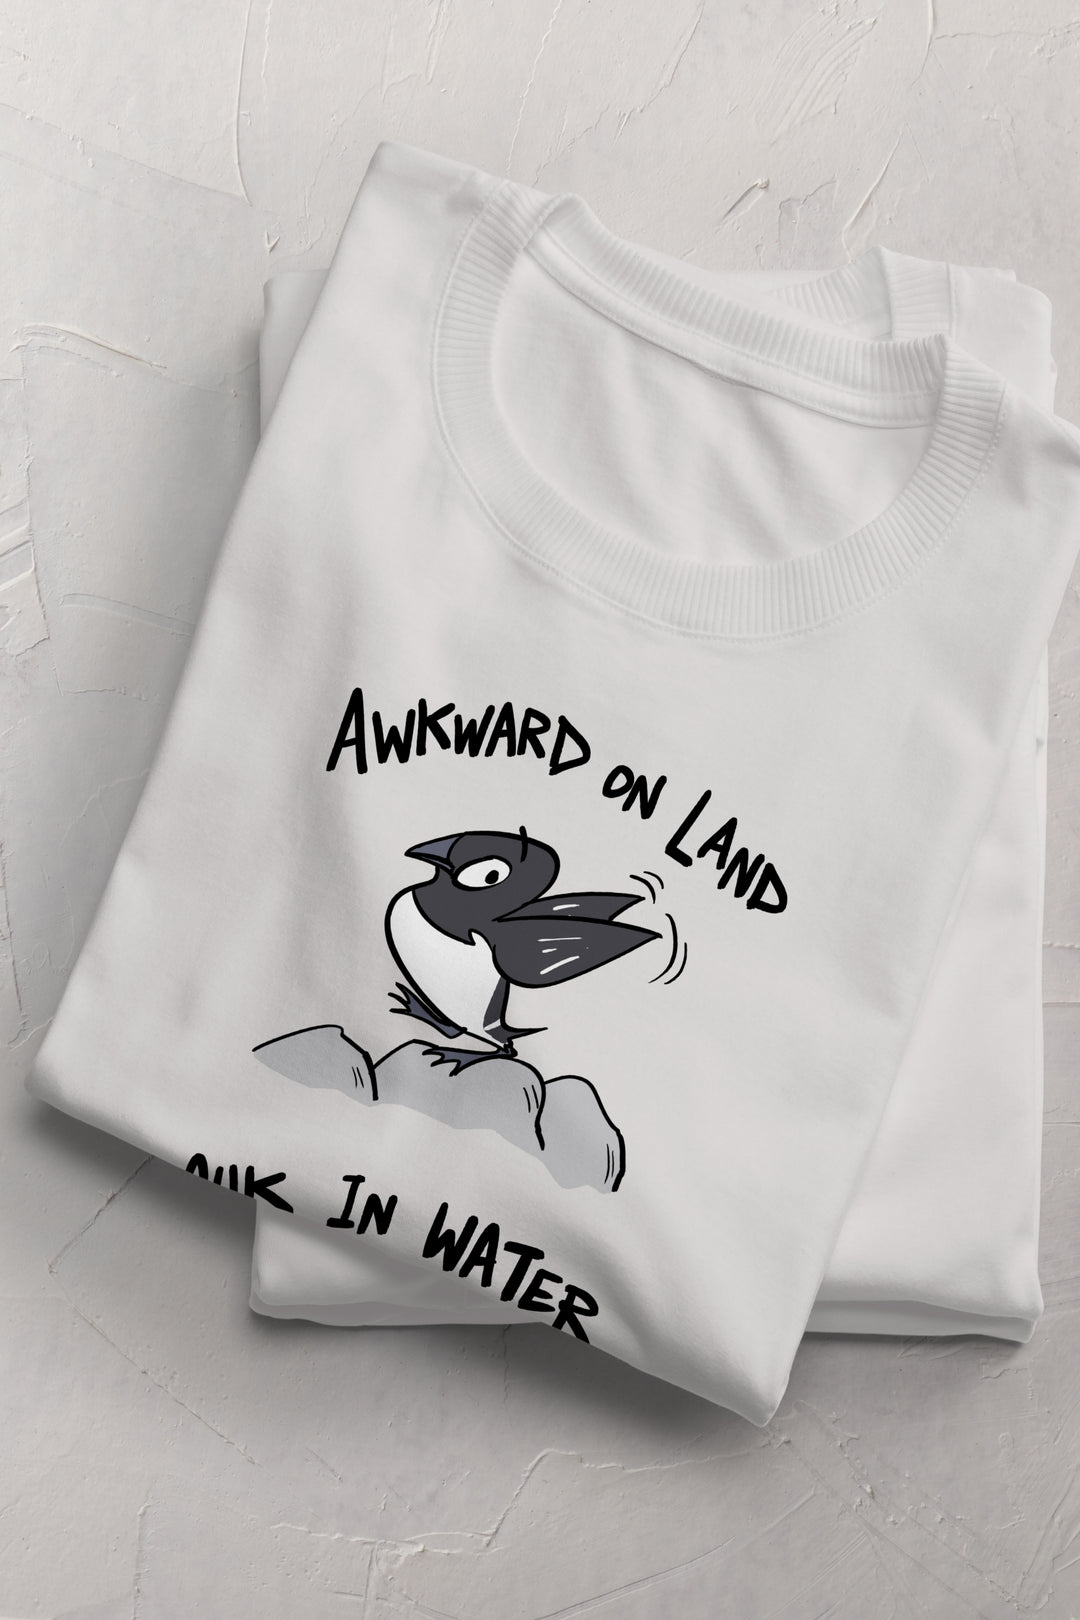 Awkward on Land/in Water T-shirt